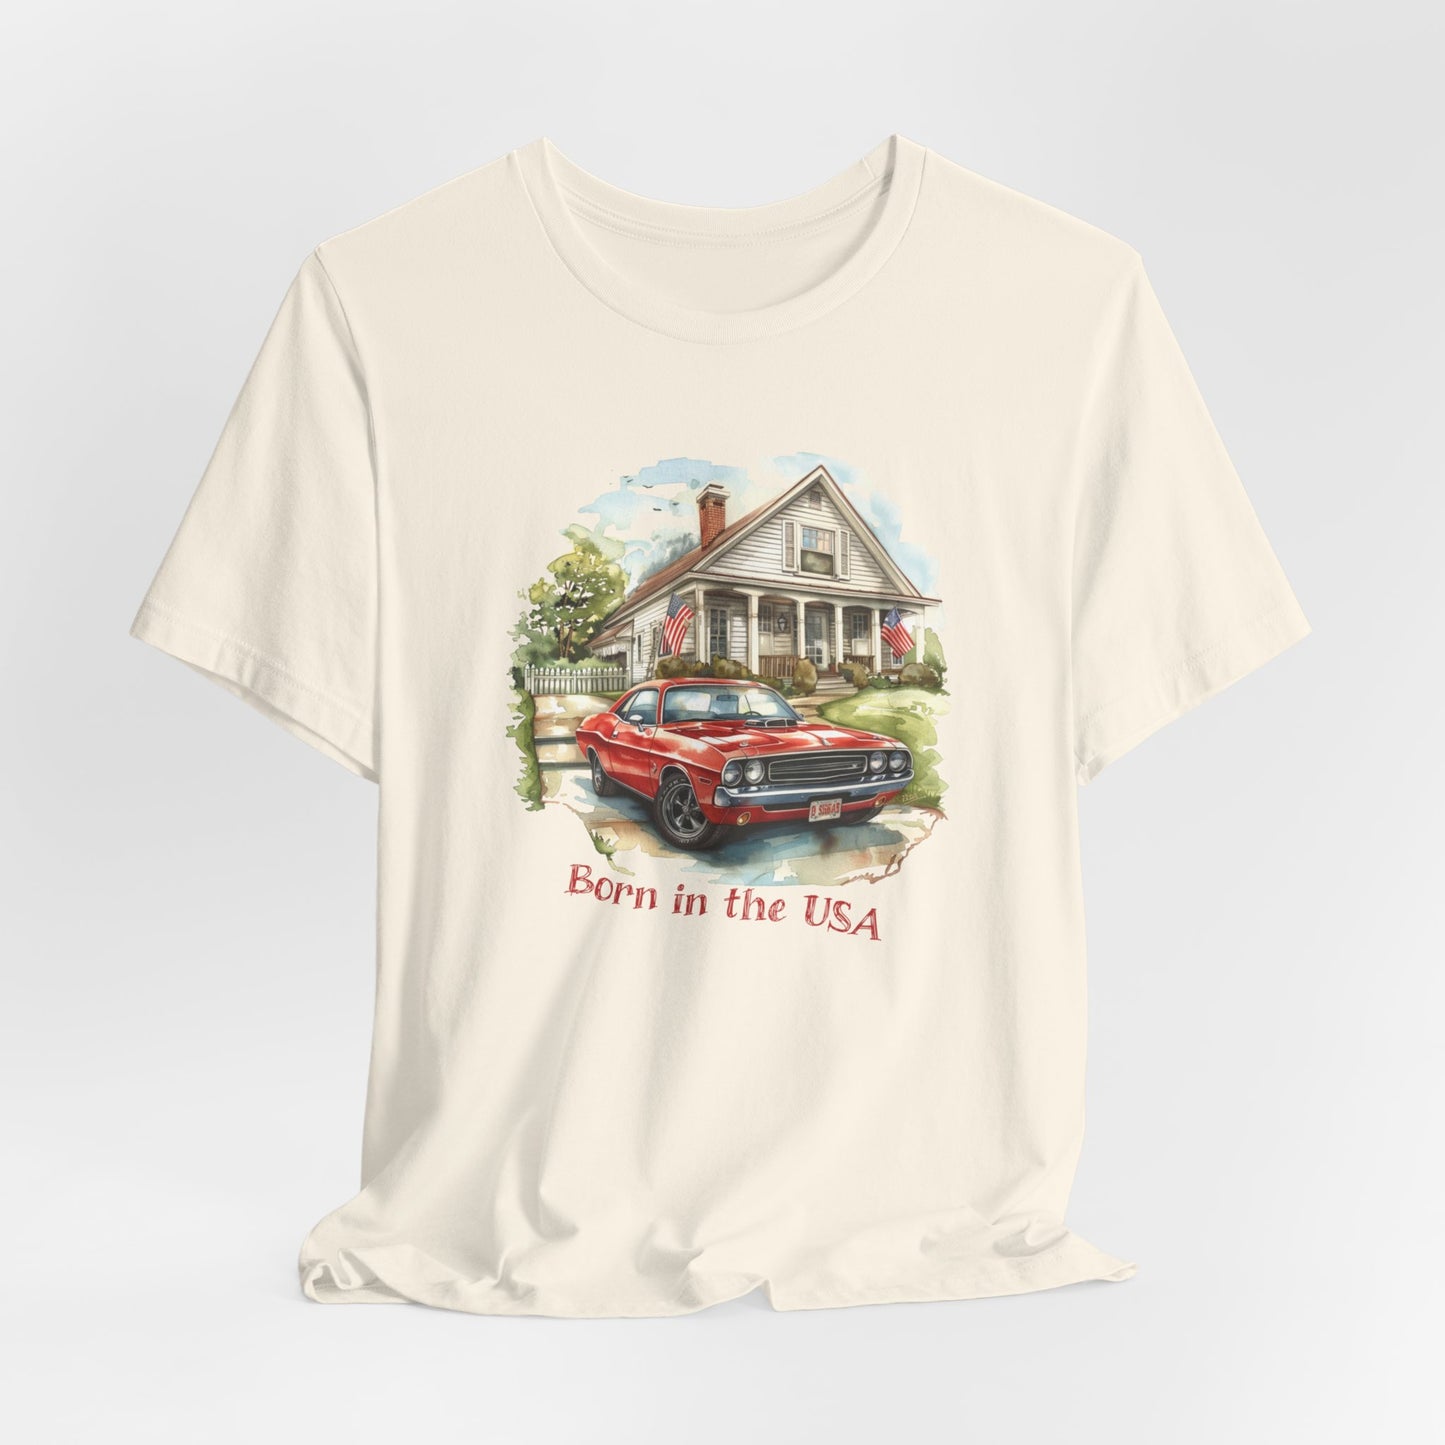 Born in the USA Unisex Jersey Short Sleeve Tee, Watercolor American Muscle Car Design, 100% Cotton/Cotton Blend, White/Natural, Car Guy Gift